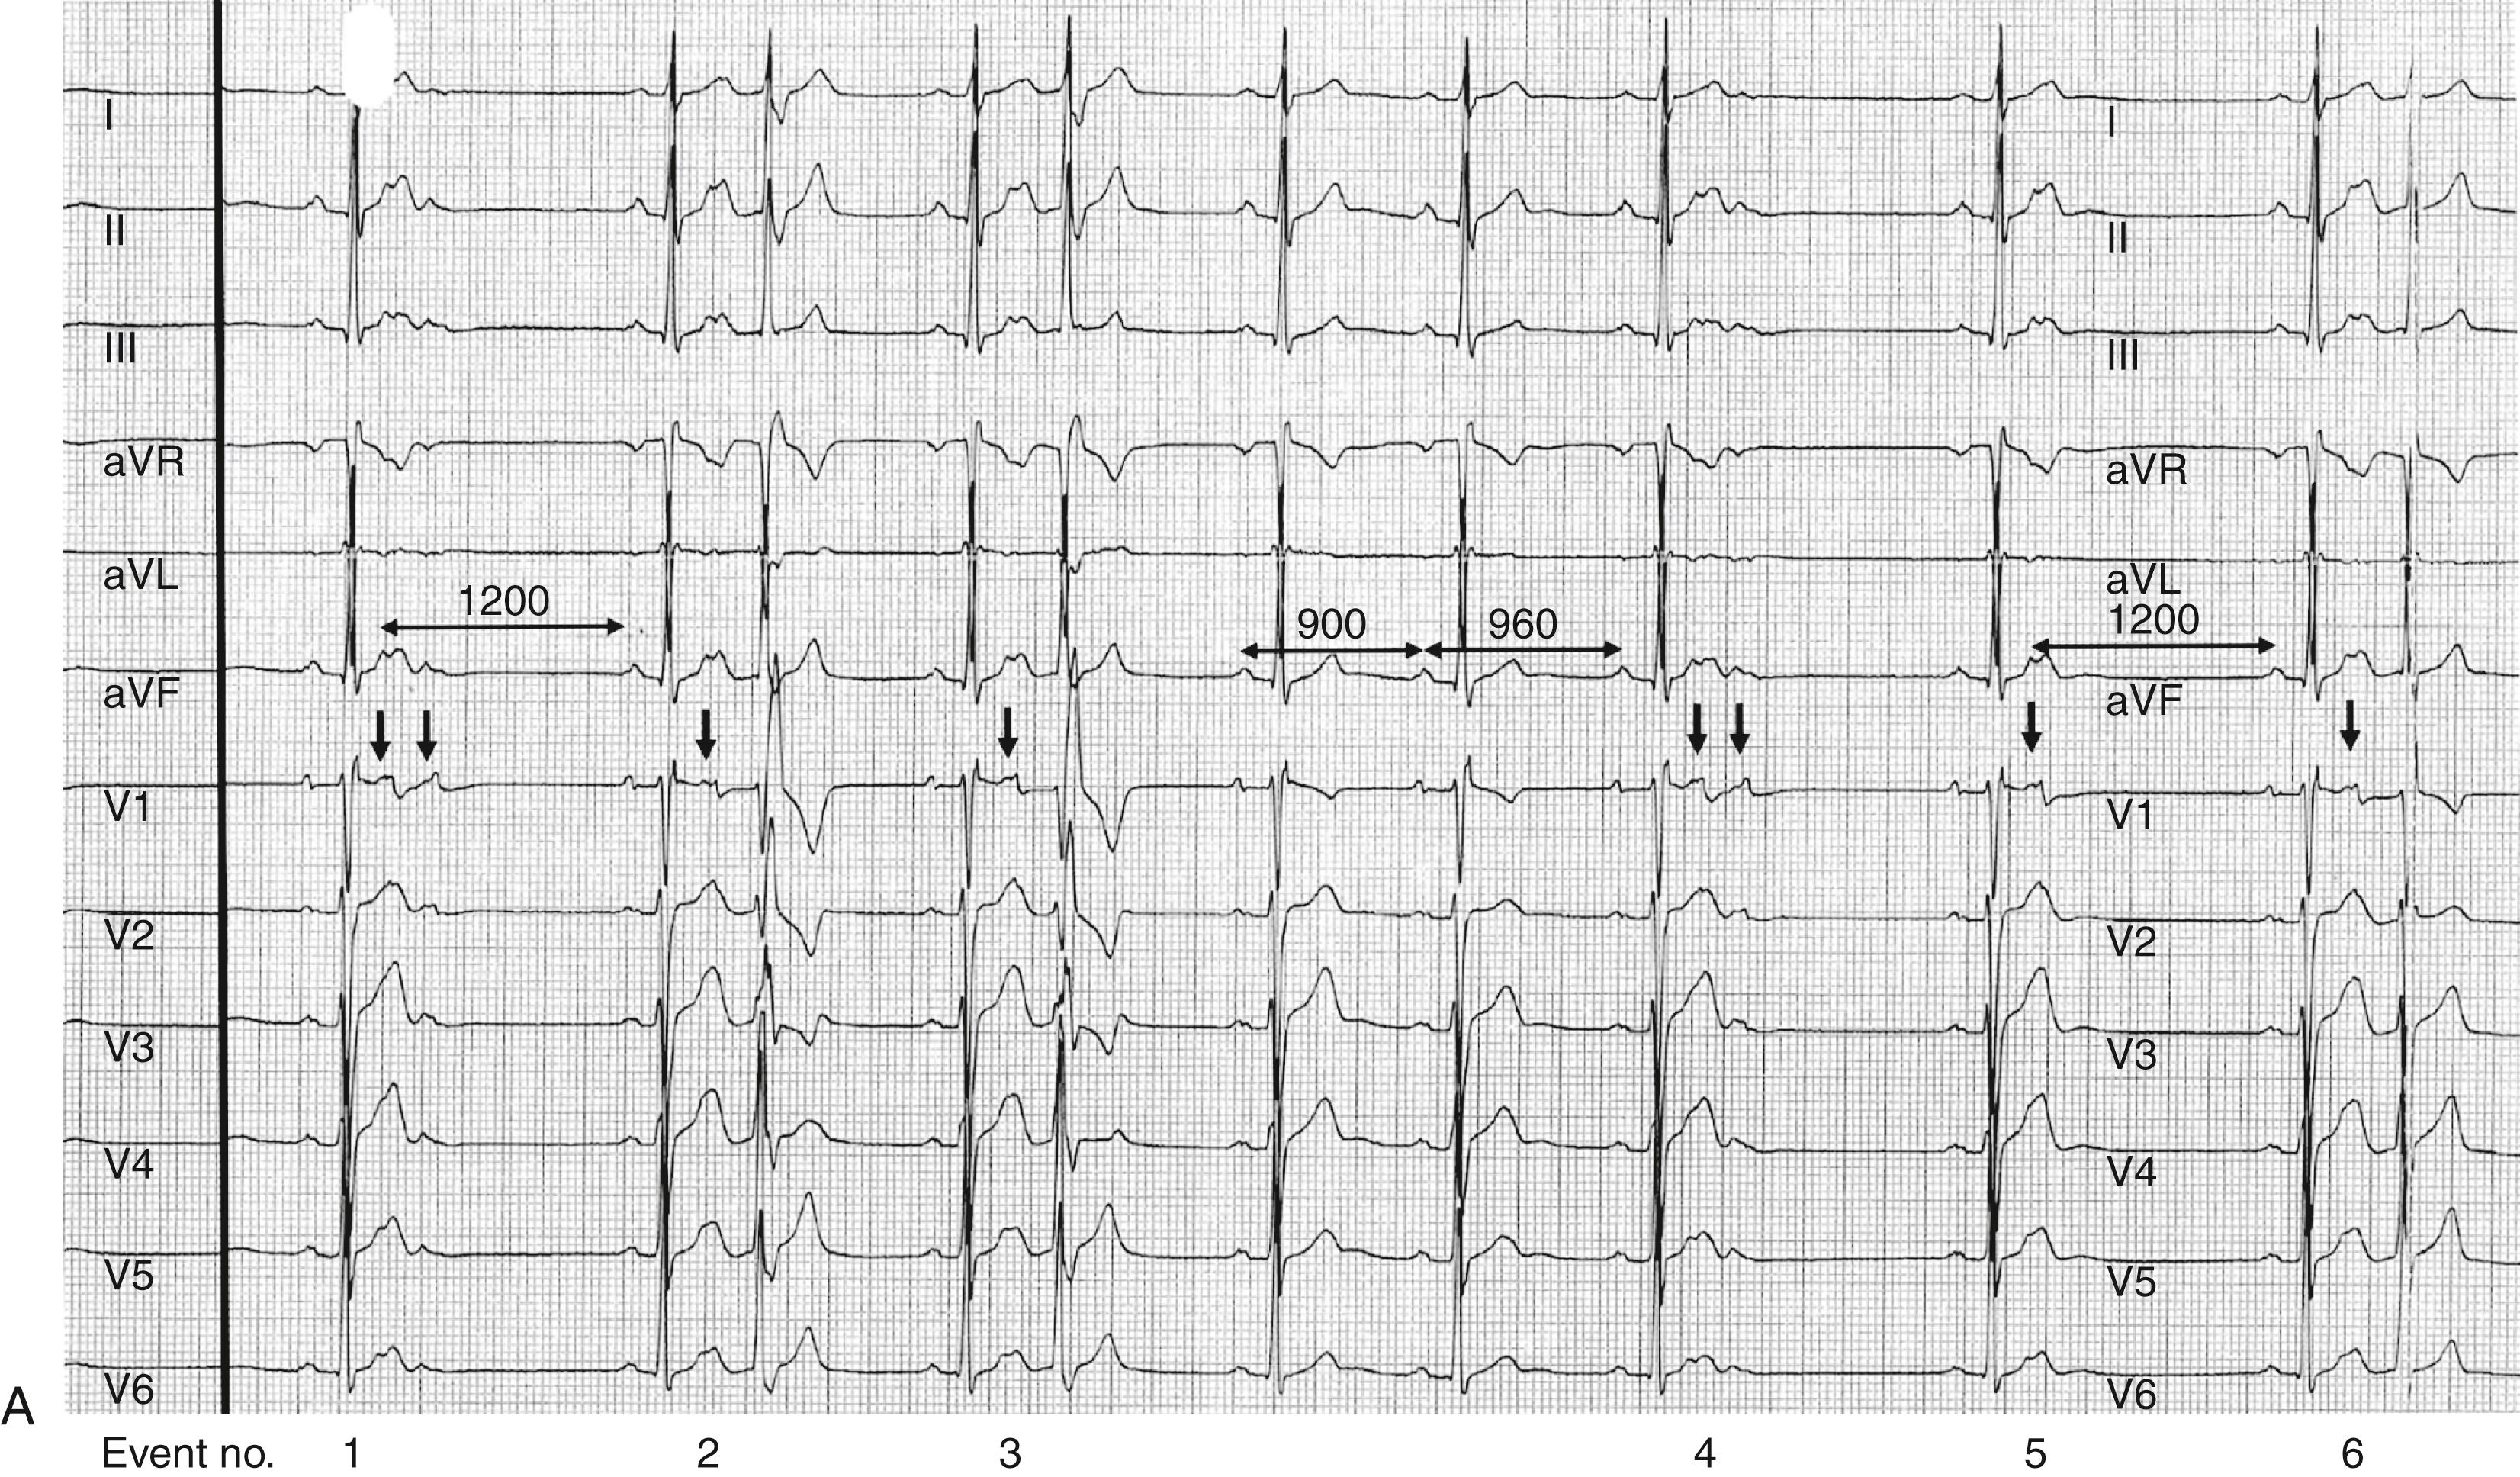 FIGURE 65.1, A, Continuous 12-lead ECG with frequent atrial ectopics. Events 1 and 4 demonstrate 2 atrial ectopic beats in quick succession; the first is inscribed within the initial component of the T wave and the P wave morphology is obscured. The second occurs immediately after the T wave, and the morphology is very different from the sinus morphology. This is particularly evident in lead III and V 1 . Neither of these two ectopics in event 1 or 4 are conducted, creating the appearance of an unexpected sinus pause. Similarly, event 5 has a single ectopic beat inscribed within the T wave, which is nonconducted and also creates an apparently unexpected pause. Close inspection of the T wave immediately before the pause clearly demonstrates the mechanism. The pause duration from ectopic to next sinus beat (1200 msec) is longer than a single sinus interval (900 msec). This longer interval includes the conduction time into the node, depolarization and reset of the node possibly with overdrive suppression, and then conduction out from the node (sinoatrial conduction time). Note that in event 1 the pause from first ectopic to the following sinus beat is also 1200 msec, indicating that the second ectopic beat has not resulted in further sinus node reset. This is presumably because the perinodal region was refractory as a result of the immediately preceding ectopic. In events 2, 3, and 6, the ectopic is conducted with a prolonged PR interval as the early ectopic is conducted to the AV node while still relatively refractory and therefore decremental or slow conduction occurs. The QRS complex in these conducted beats demonstrates right bundle branch block aberrancy. The long preceding interval produced by the pause is followed by a short interval, which renders the right bundle branch refractory at that moment. Note that the right bundle branch has a longer refractory period than that of the left bundle branch. B, Continuous 3-lead rhythm strip with high burden of atrial ectopics. In events 1, 2, 7, and 8, the ectopic beat is conducted with a long PR interval and right bundle branch aberrancy. In events 3, 4, and 5 there is a nonconducted atrial ectopic beat occurring within the T wave, creating a pause. The bigeminal pattern of atrial ectopy therefore creates the impression of a marked sinus bradycardia with apparent sinus interval of 1440 msec. In event 5, a second atrial premature beat occurs immediately after the T wave and the visible morphology indicates that this is different from the sinus morphology (best appreciated in aVF). Event 6 is the only normal T wave appearance because there is no inscribed atrial ectopic ( downward pointing arrow ) . The sinus interval following the absence of an atrial premature beat is 920 msec rather than the apparent interval of 1440 msec. The interval between the nonconducted atrial premature beat and the following sinus beat (1080 msec) is longer than the sinus interval of 920 msec. C, Continuous three-lead ECG in event 1, an atrial premature beat that conducts with a long PR interval and right bundle branch block (RBBB) aberrancy. In events 2, 3, 4, and 5 there are short (variable duration) runs of nonsustained atrial tachycardia. Again we see conduction with a long PR interval and some beats showing RBBB aberrancy. In event 3 the P wave preceding each QRS complex can be clearly seen when examining both aVF and V 2 ( arrows ) . This constellation of arrhythmias is frequently observed on monitoring in patients with paroxysmal atrial fibrillation.